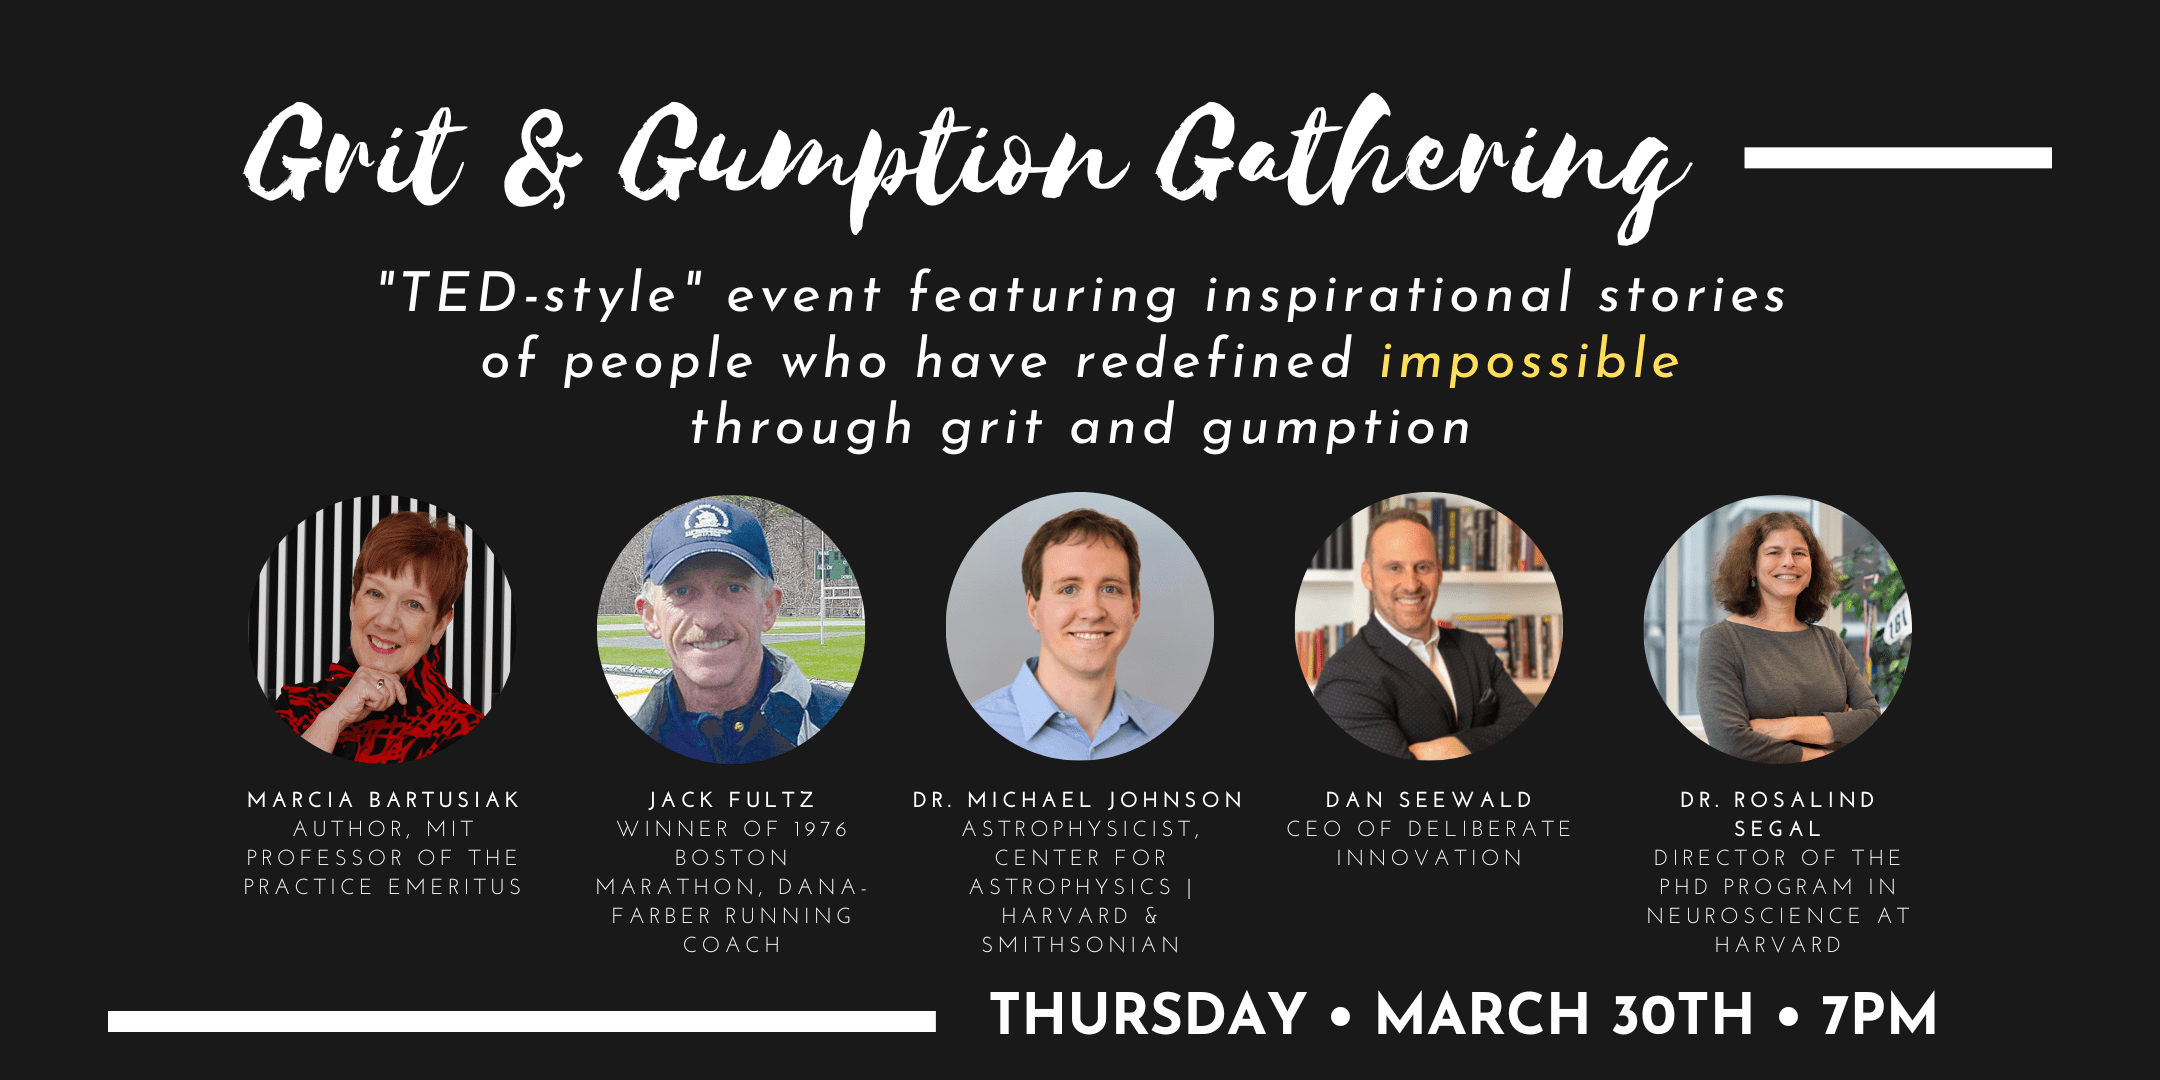 Grit and Gumption Gathering: A "TED-Style" Evening of Inspiring Stories